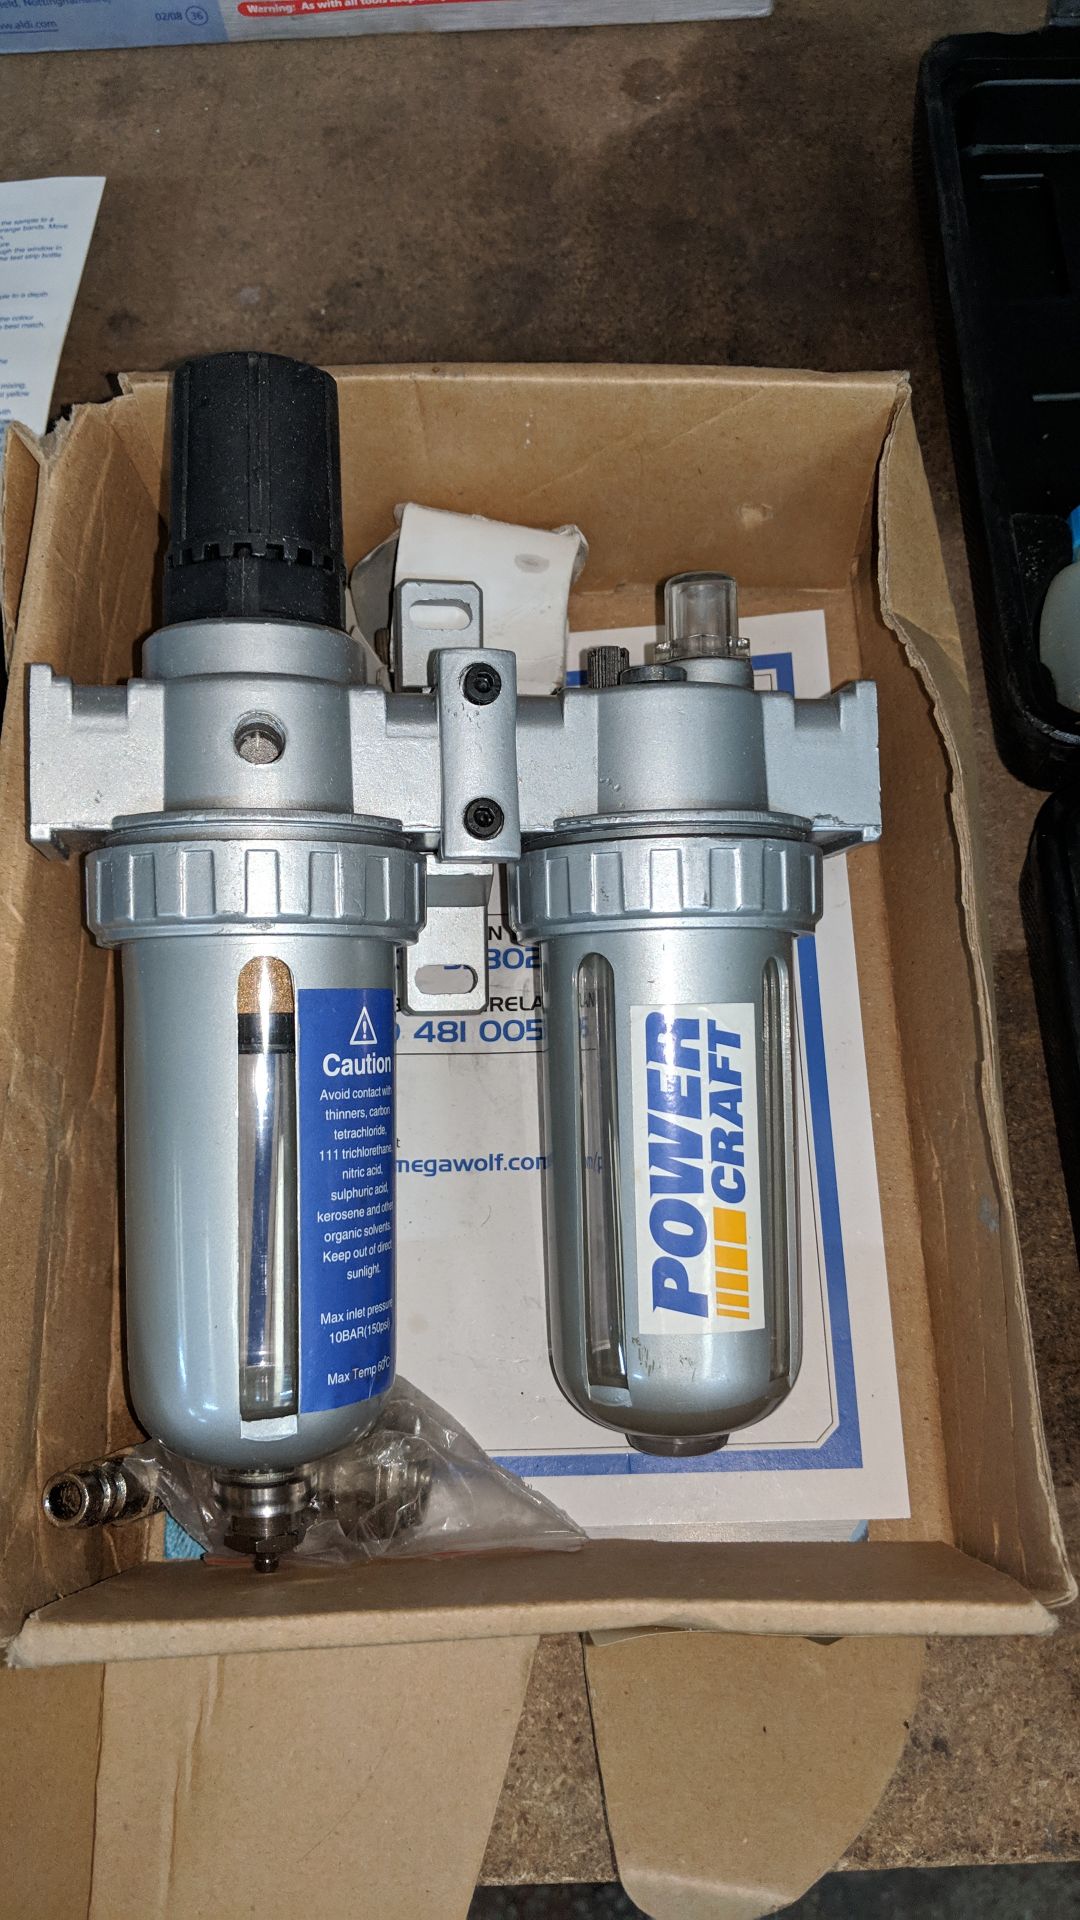 Power Craft air filter regulator and lubricator This lot is one of a number being sold on behalf the